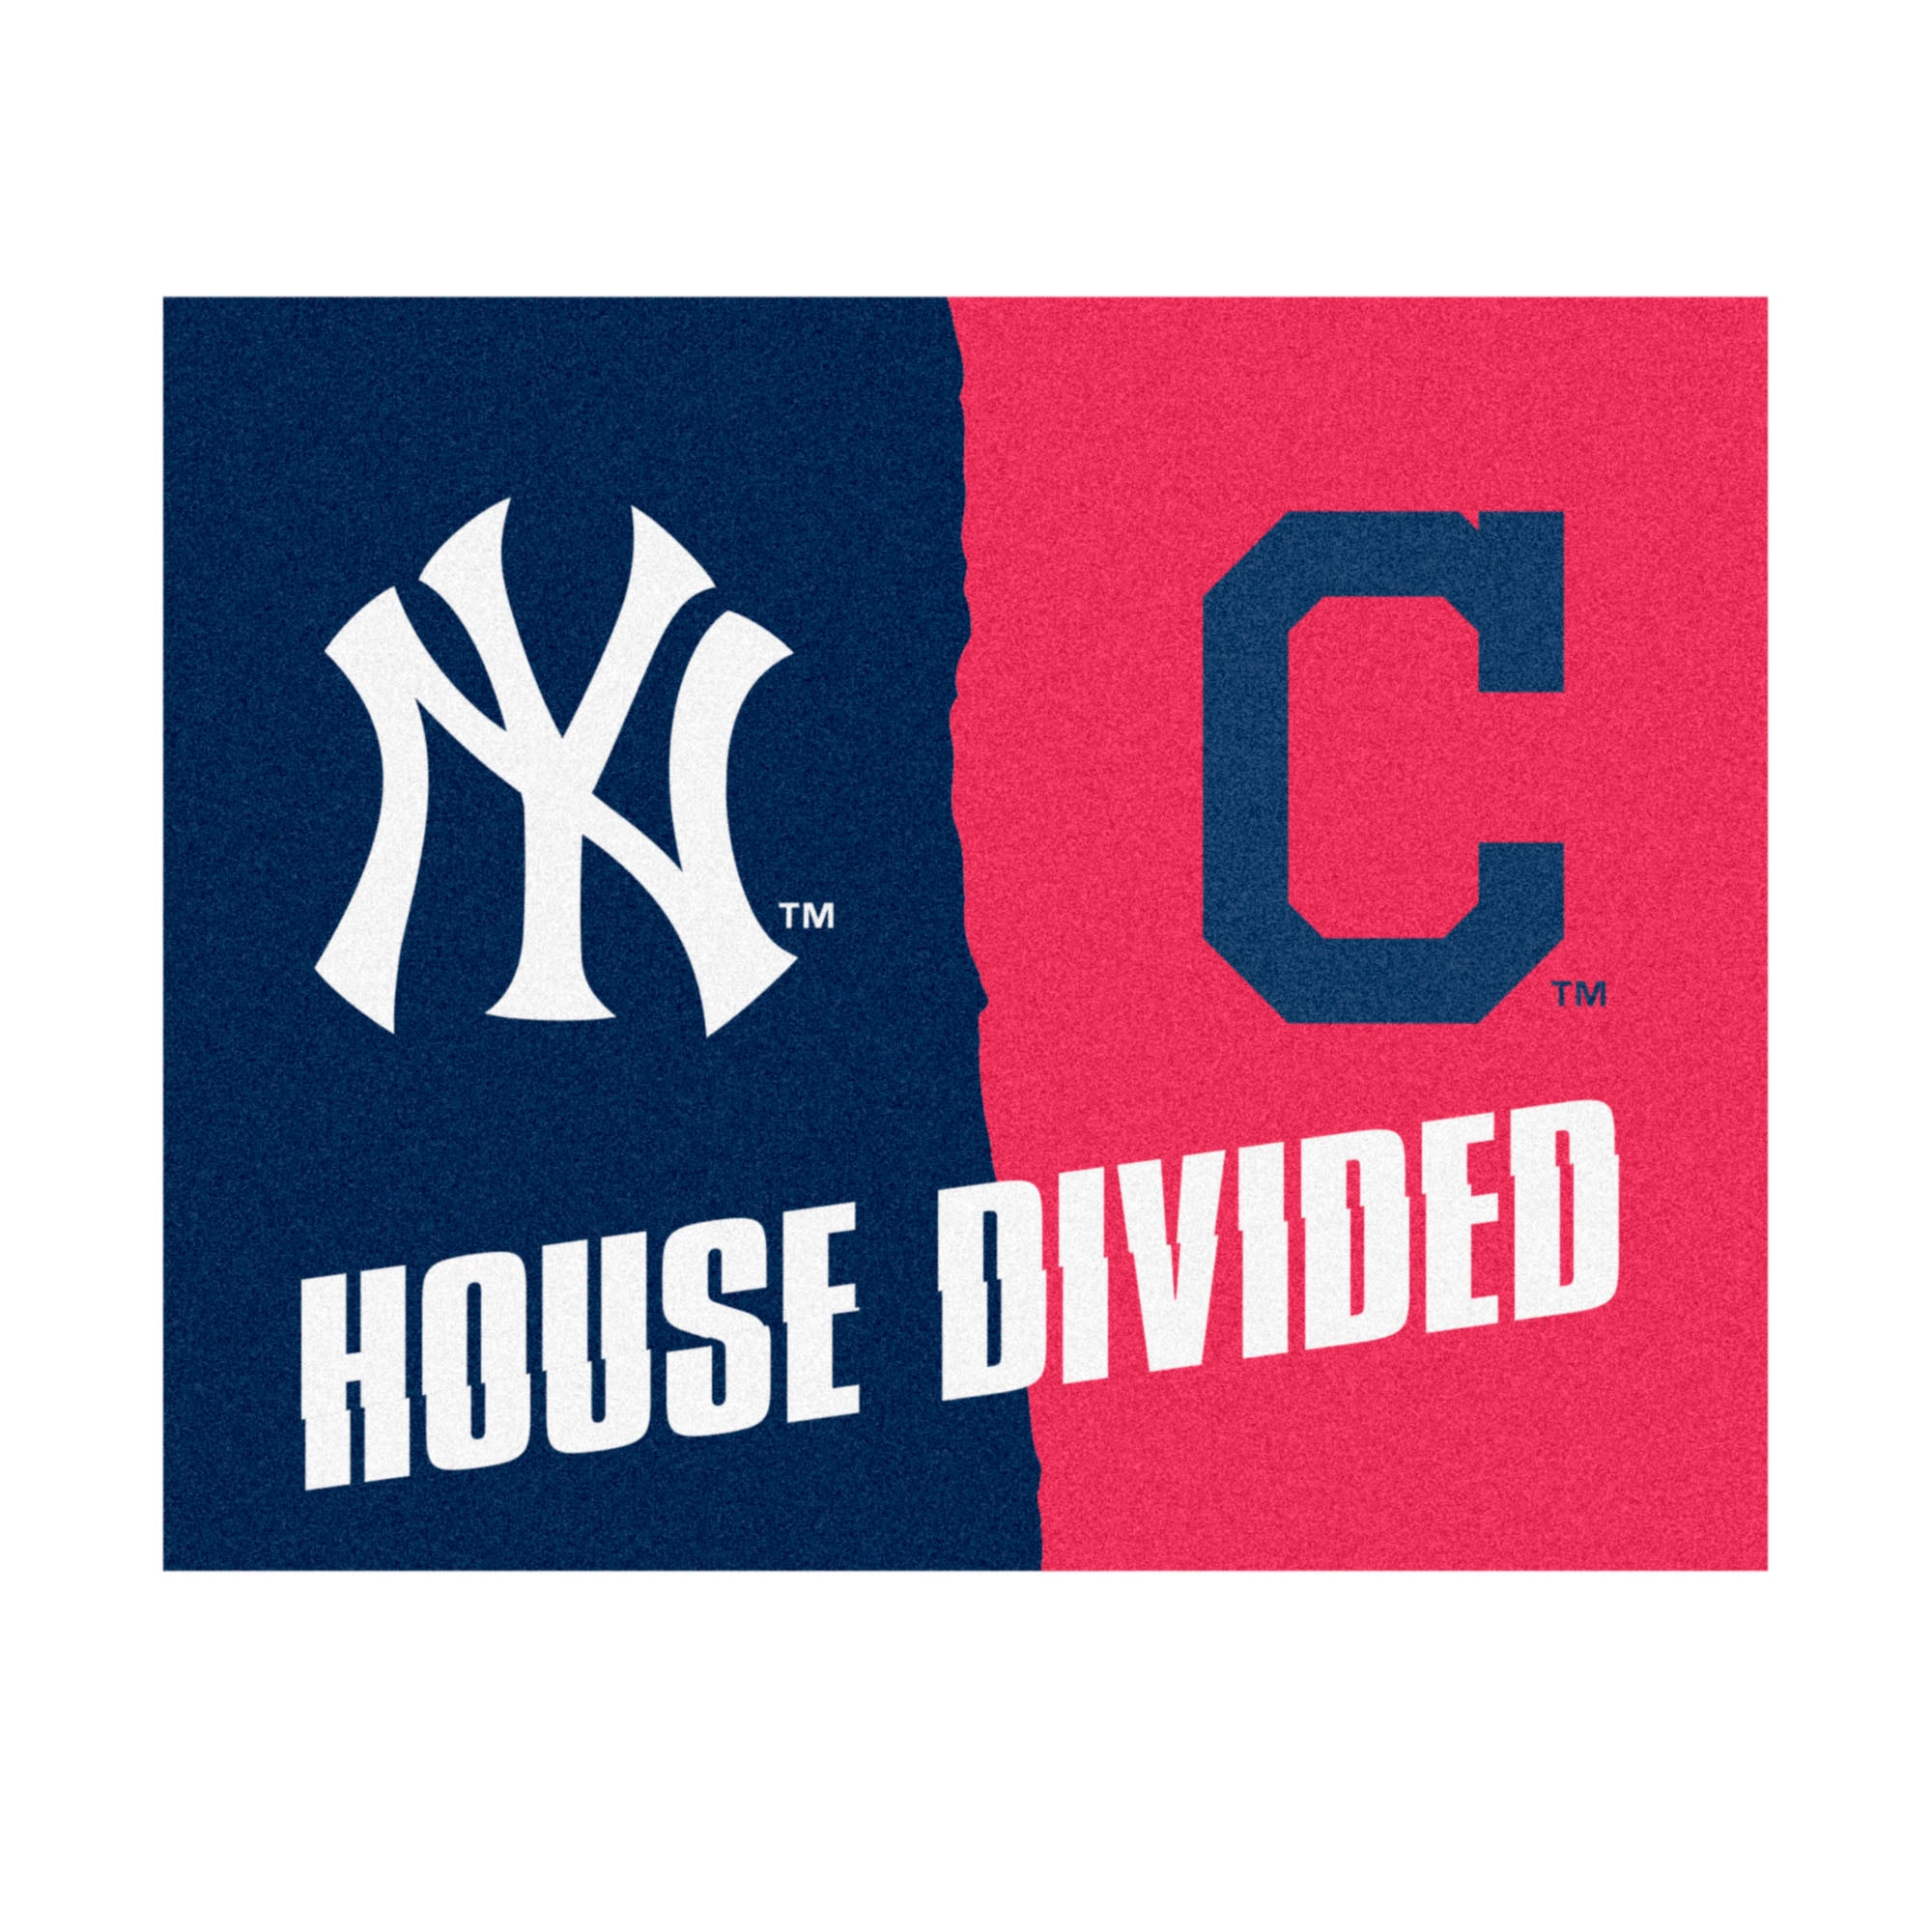 FANMATS, MLB House Divided - White Sox / Cubs House Divided Rug